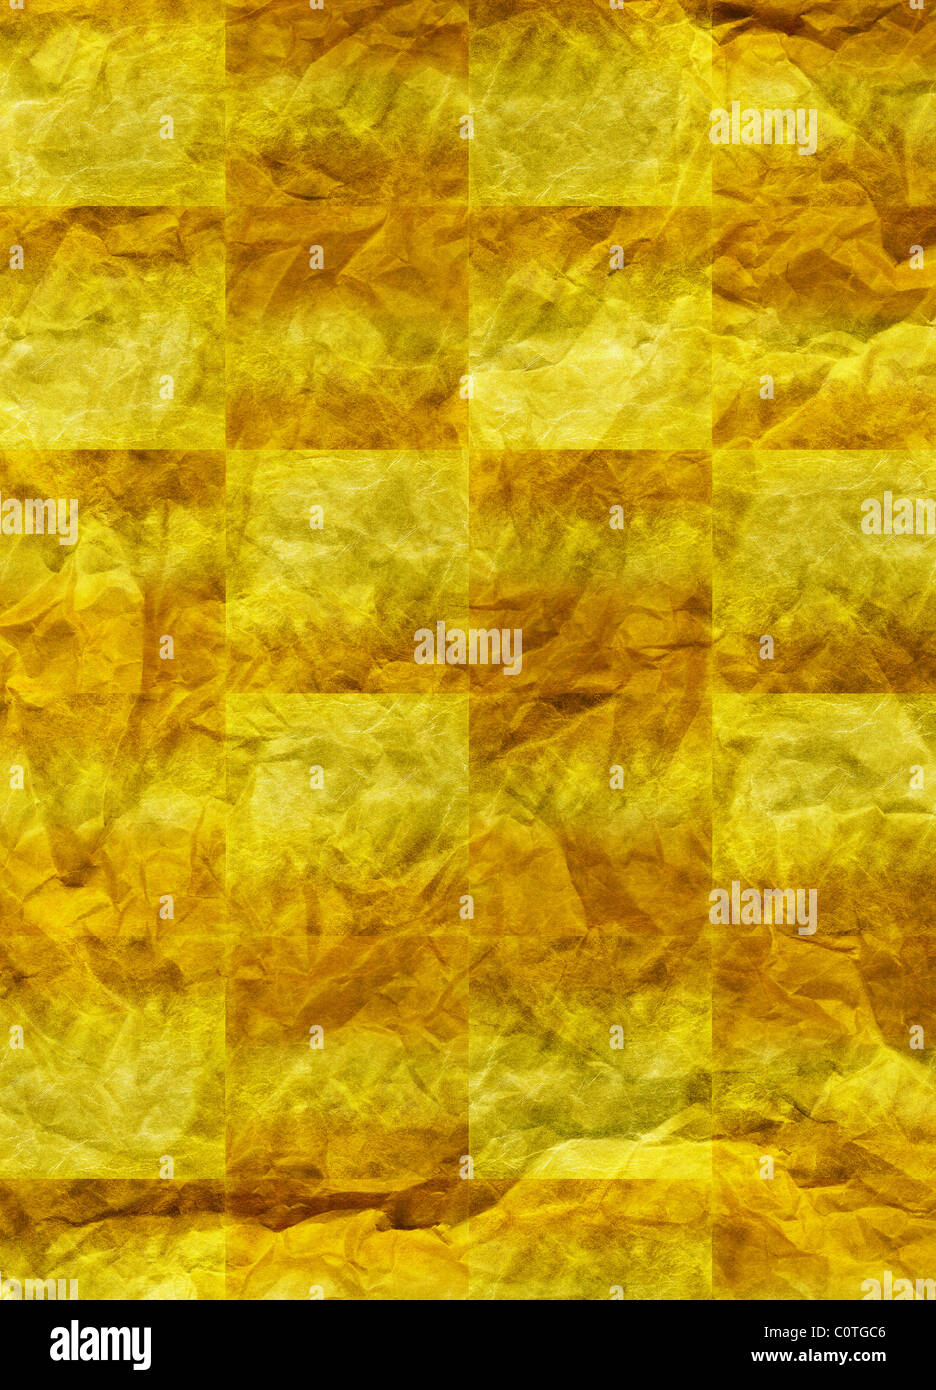 Backgrounds of Gold Foil Stock Photo